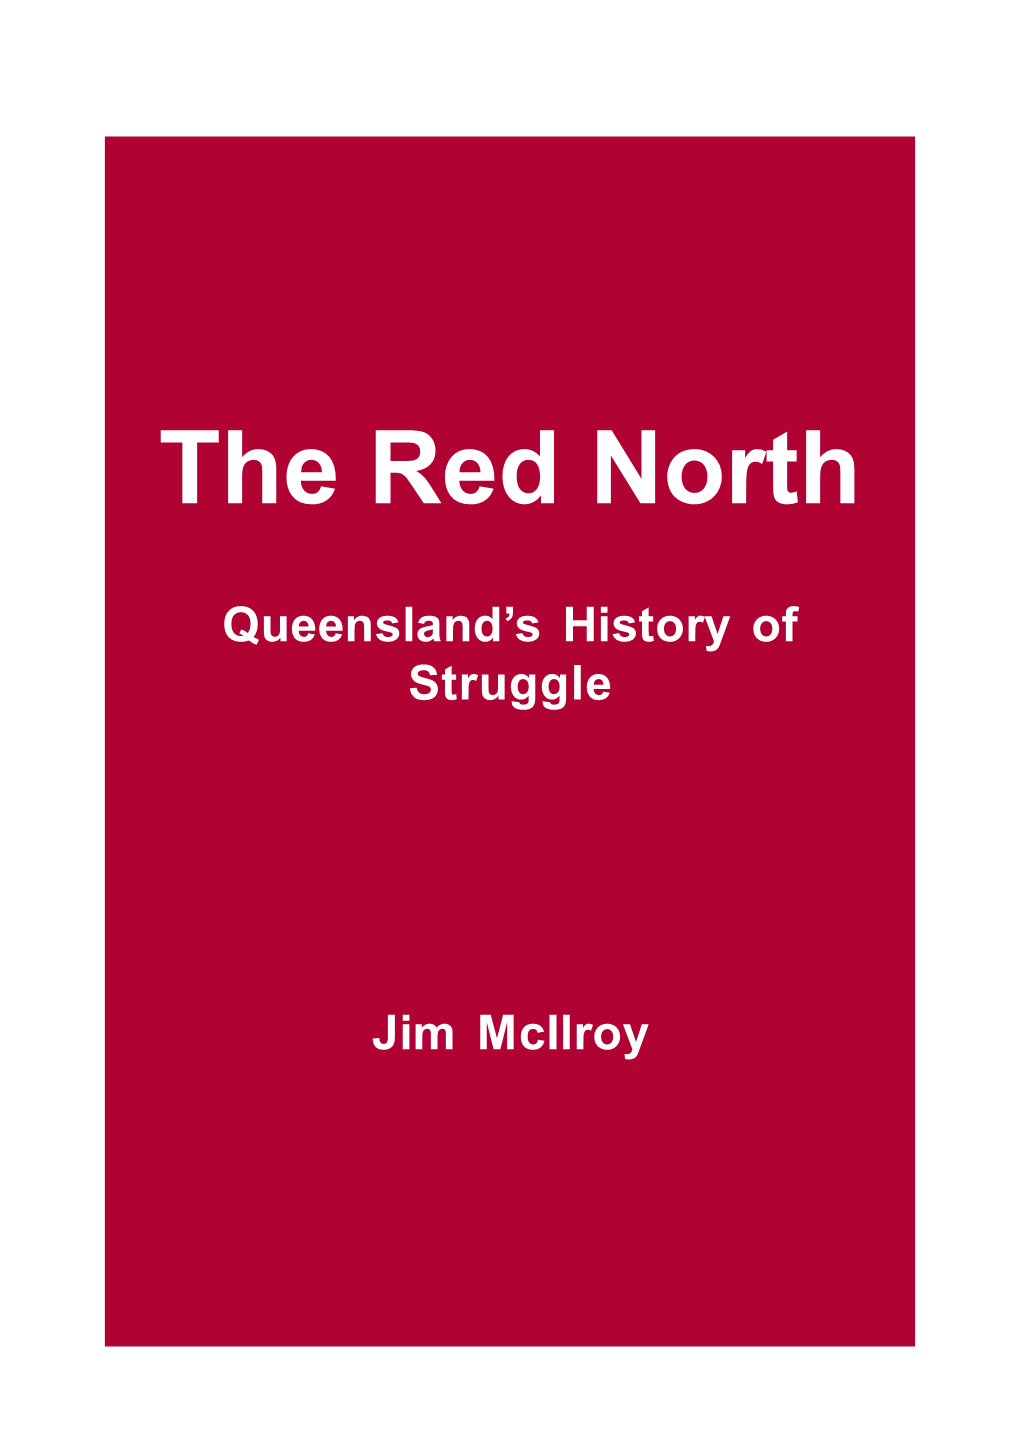 The Red North